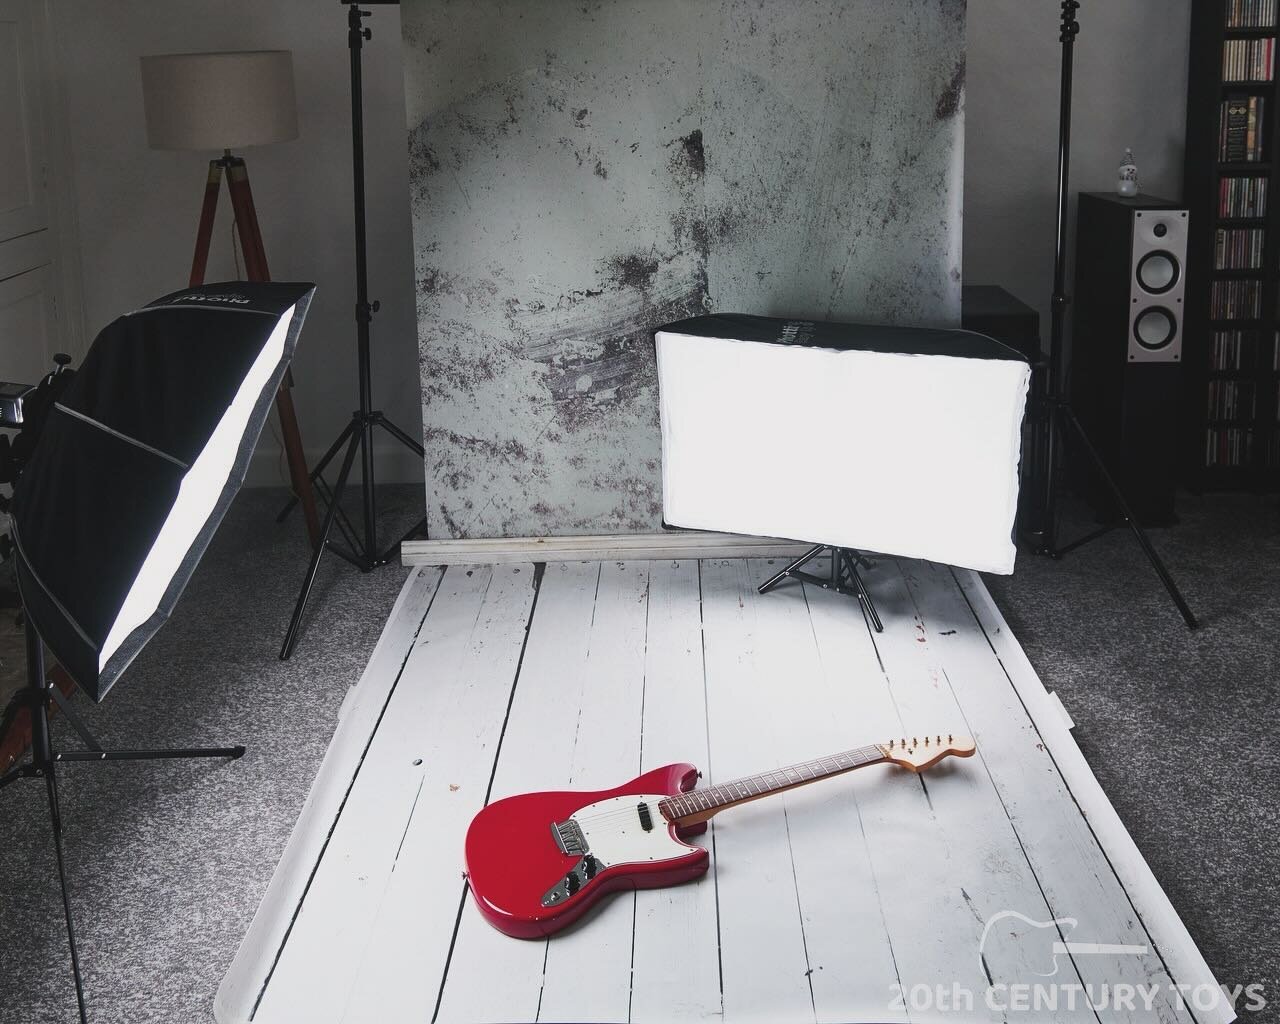 BTS. If you&rsquo;ve ever been curious about how we photograph our guitars here&rsquo;s the usual set up. This is set up to render as much clarity and detail as possible for online listings, but there are lots of different ways to shoot guitars, so i